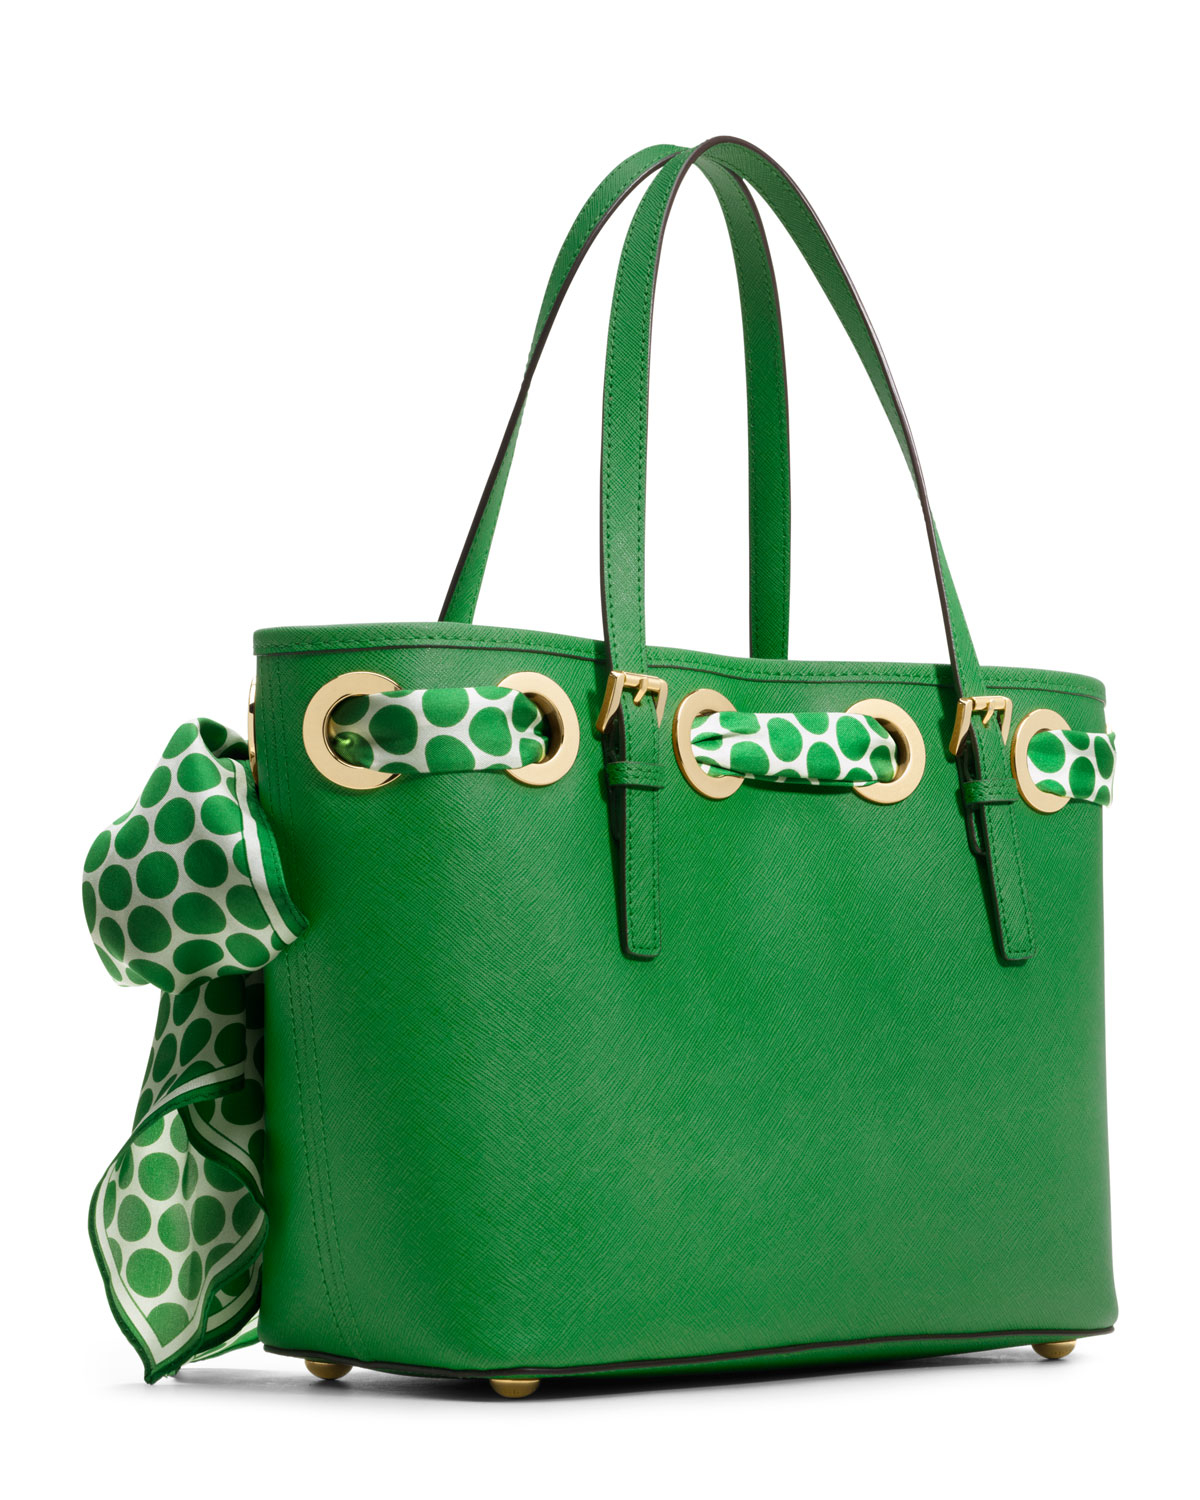 Lyst - Michael kors Small Jet Set Scarf Tote in Green